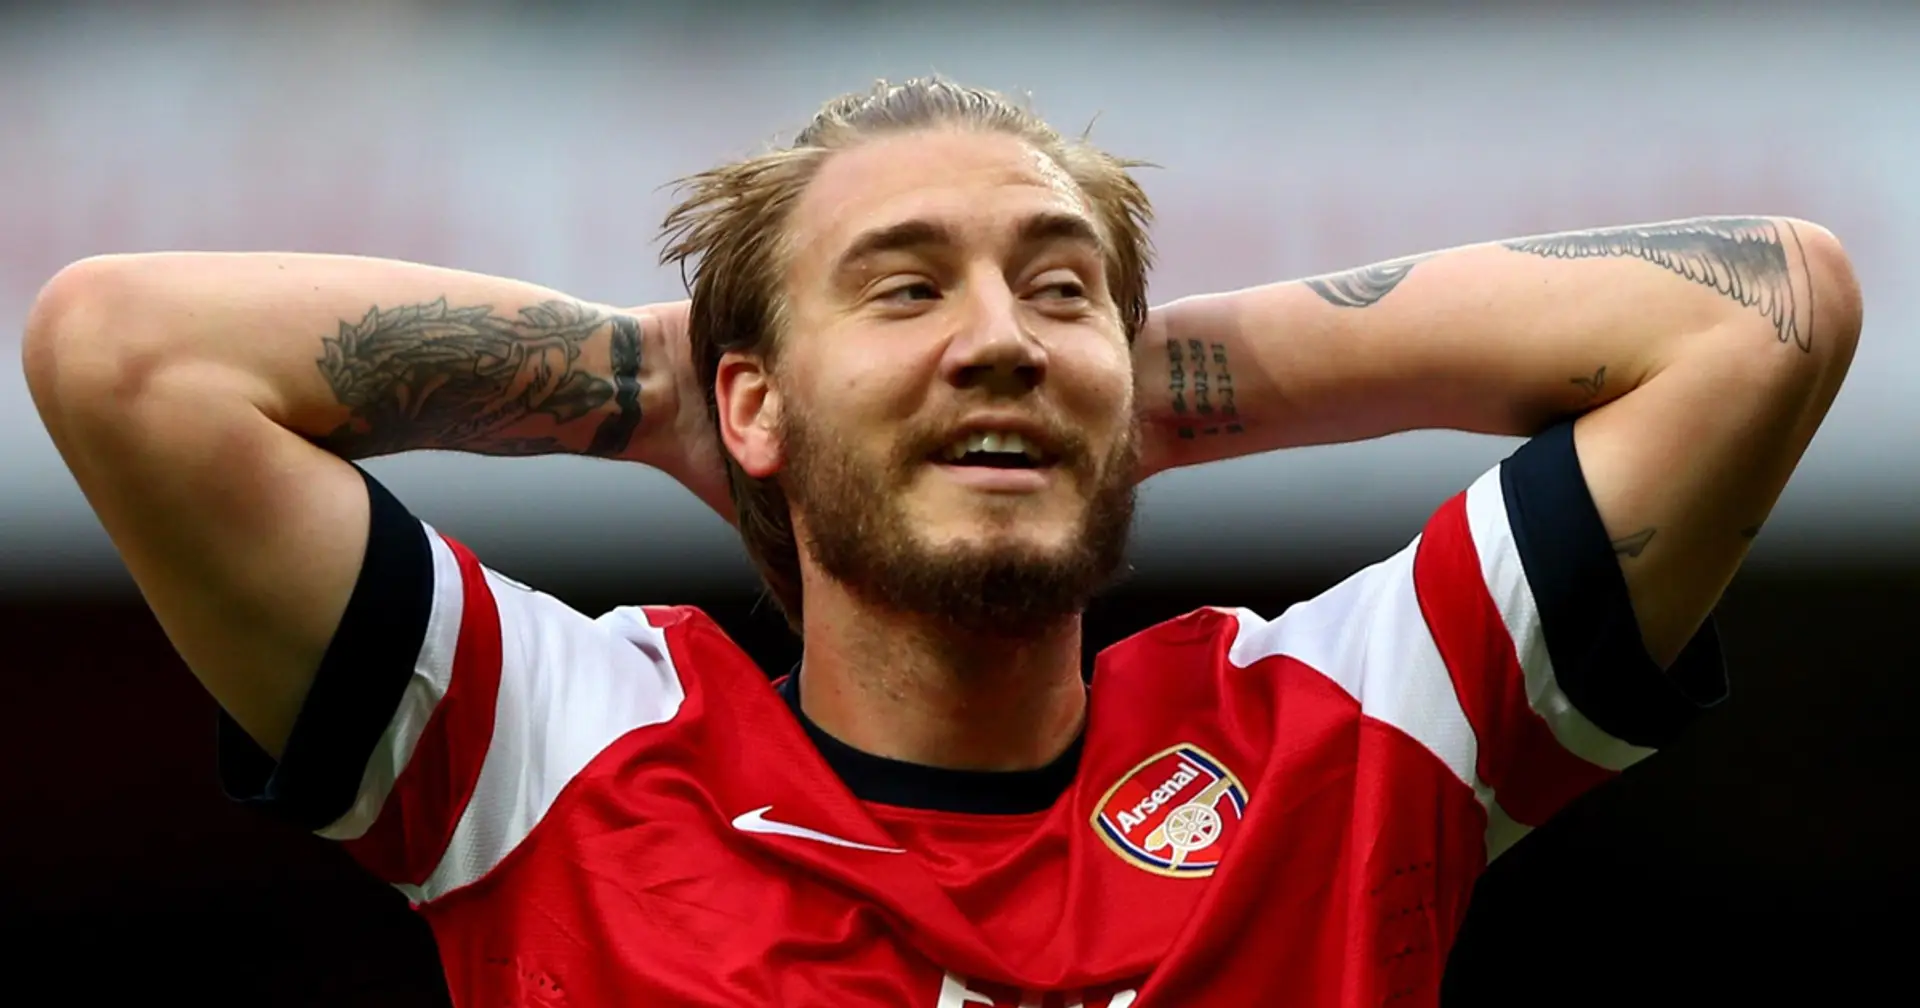 Nicklas Bendtner: 'One of the things I want to do well is to be a manager'